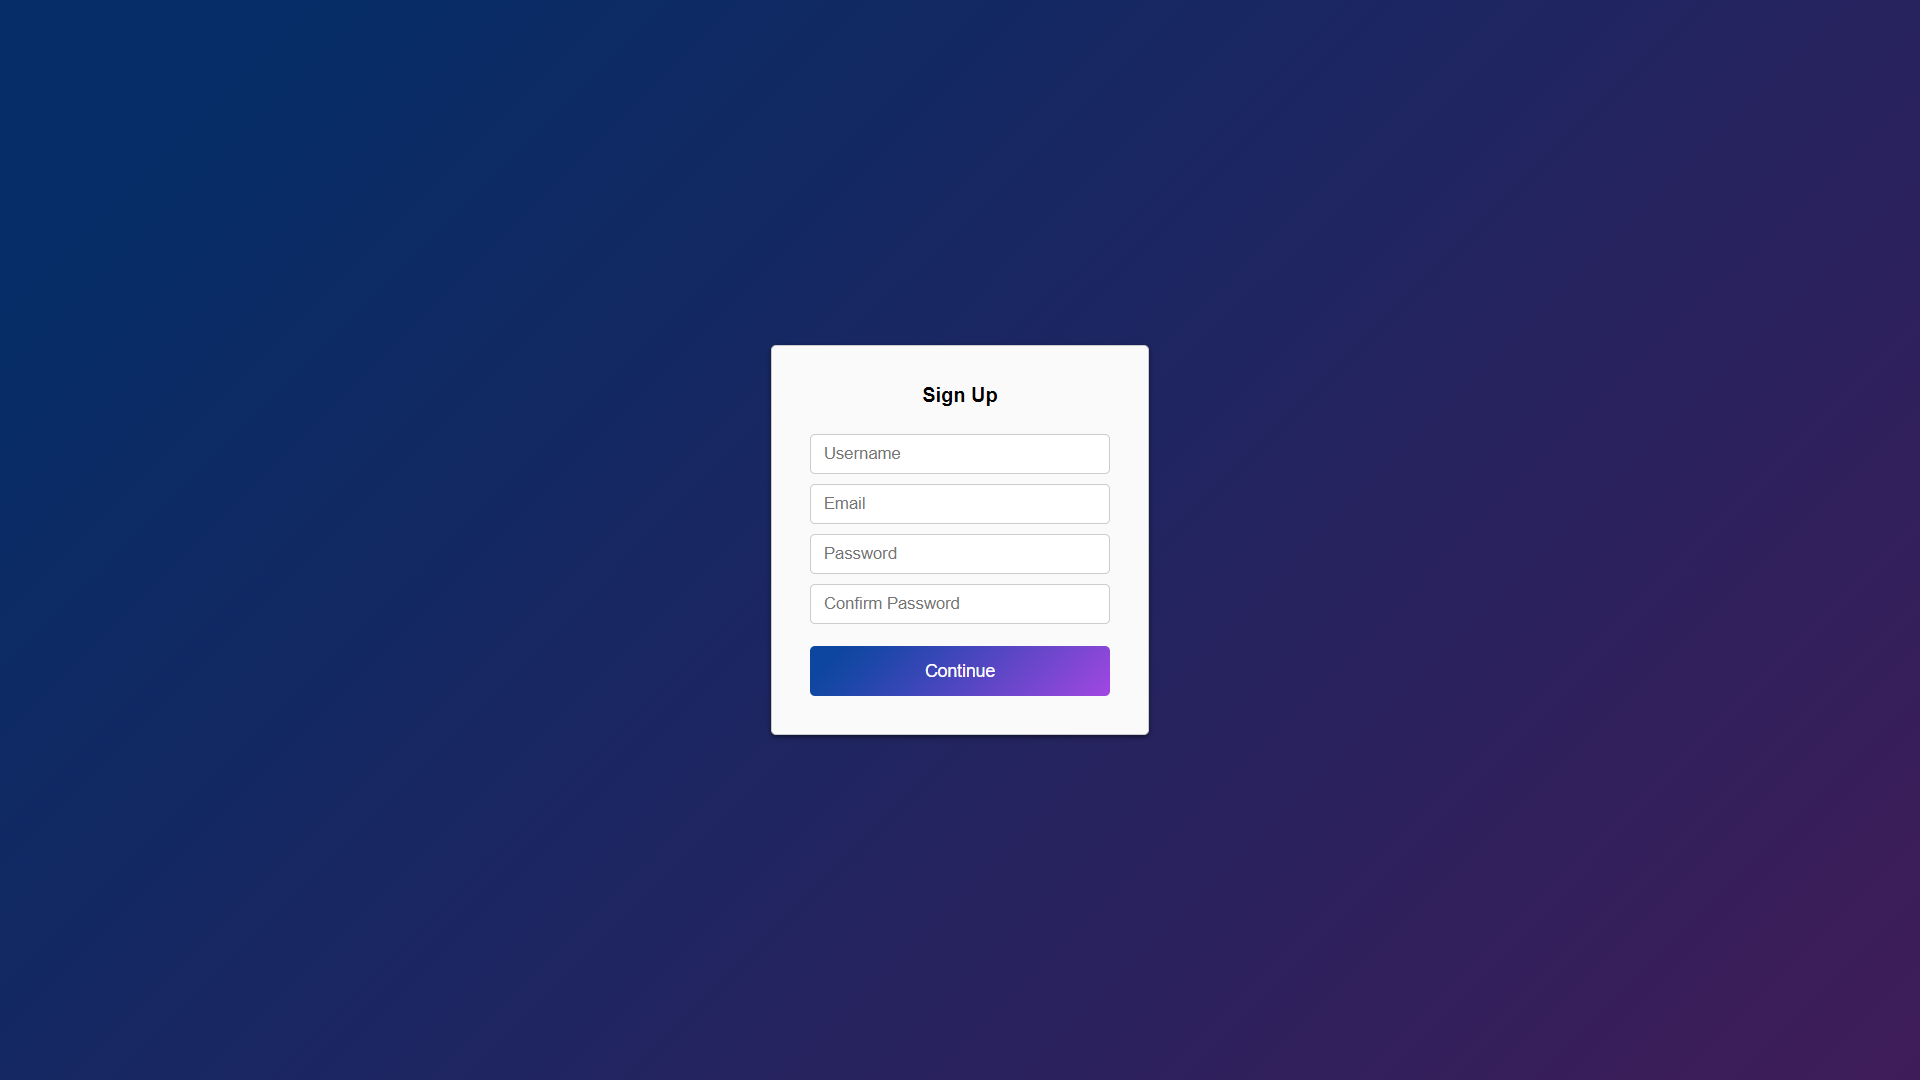 Creating a Basic Web Form With CSS in Minutes